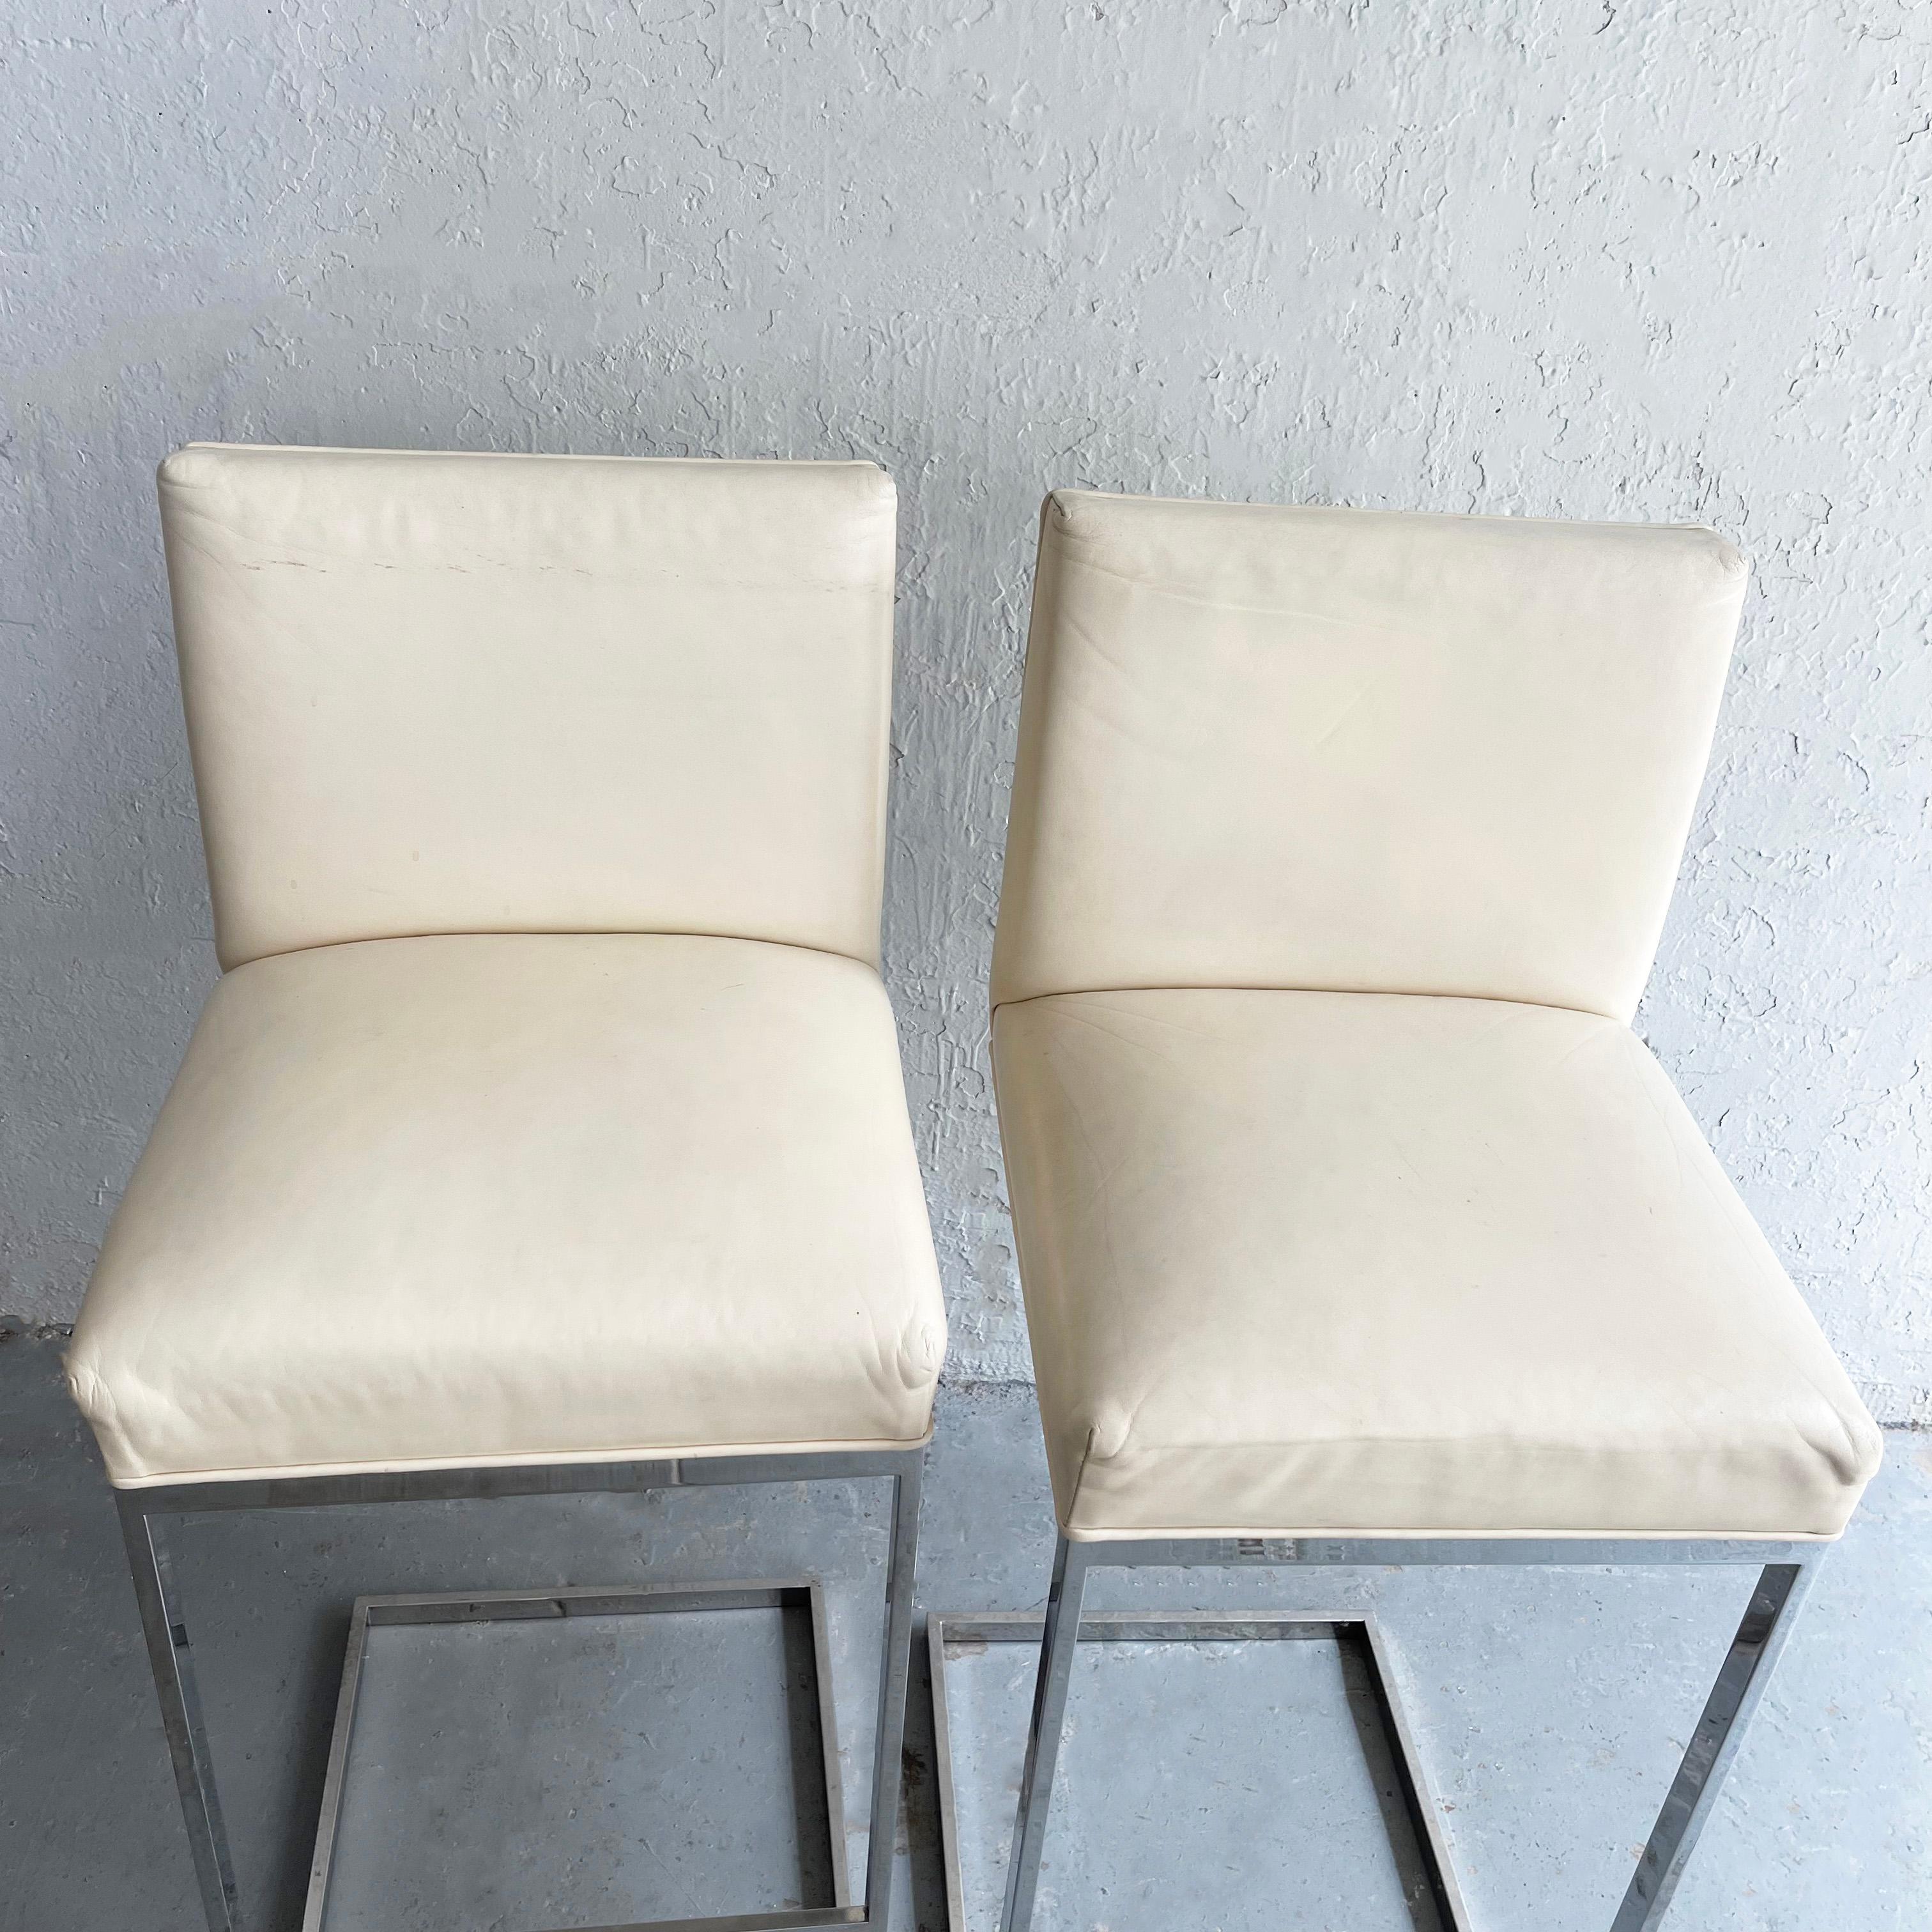 20th Century Minimal Leather Chrome Cantilever Bar Stools For Sale